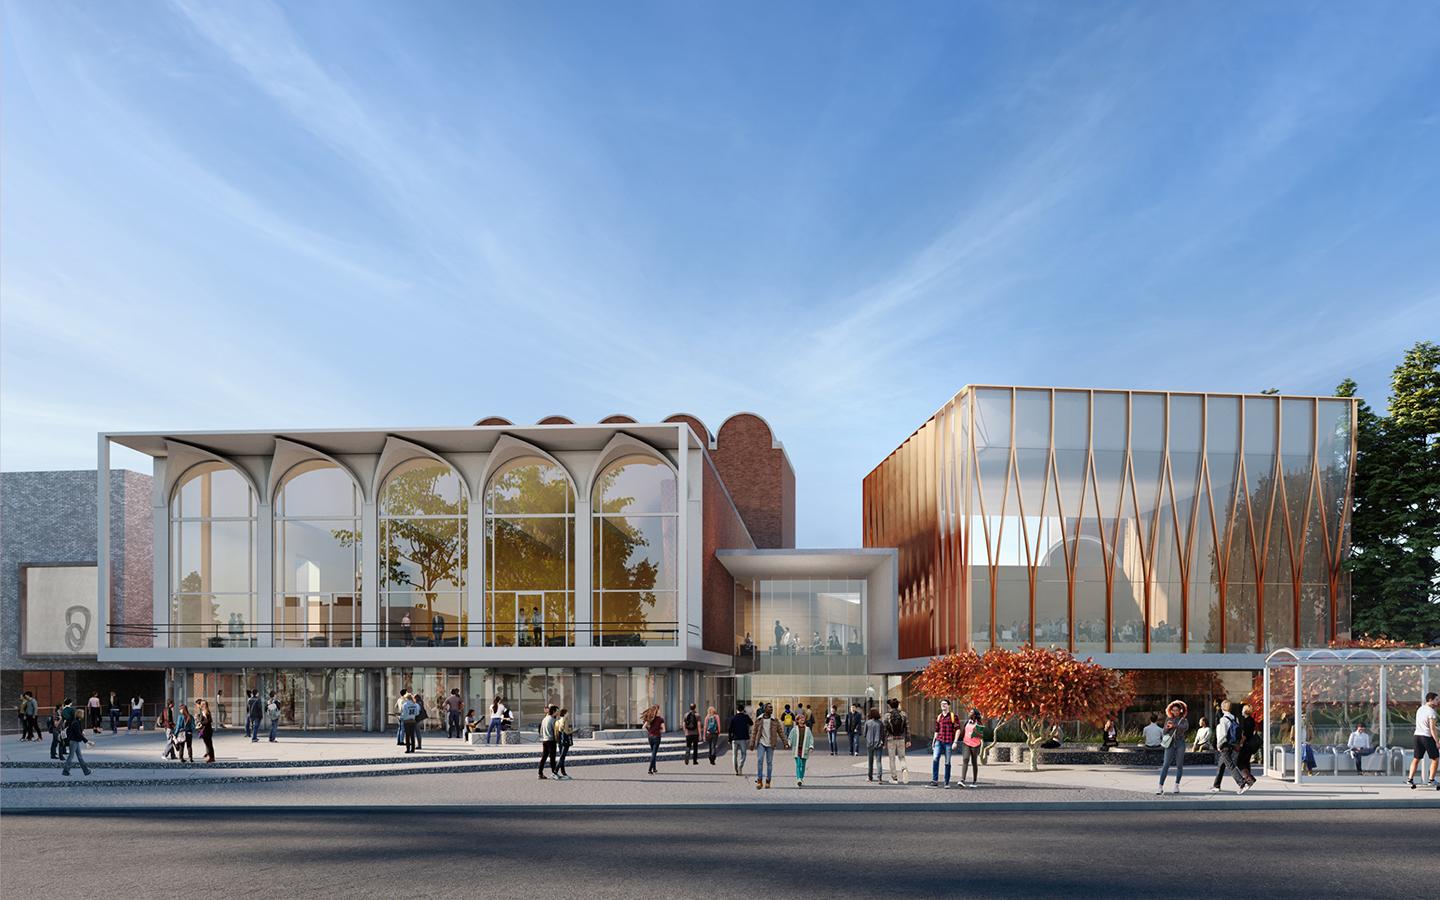 A rendering of the north facade of the Hopkins Center for the Arts includes a new wing for arts programs. (Courtesy of Snøhetta and Methanoia)